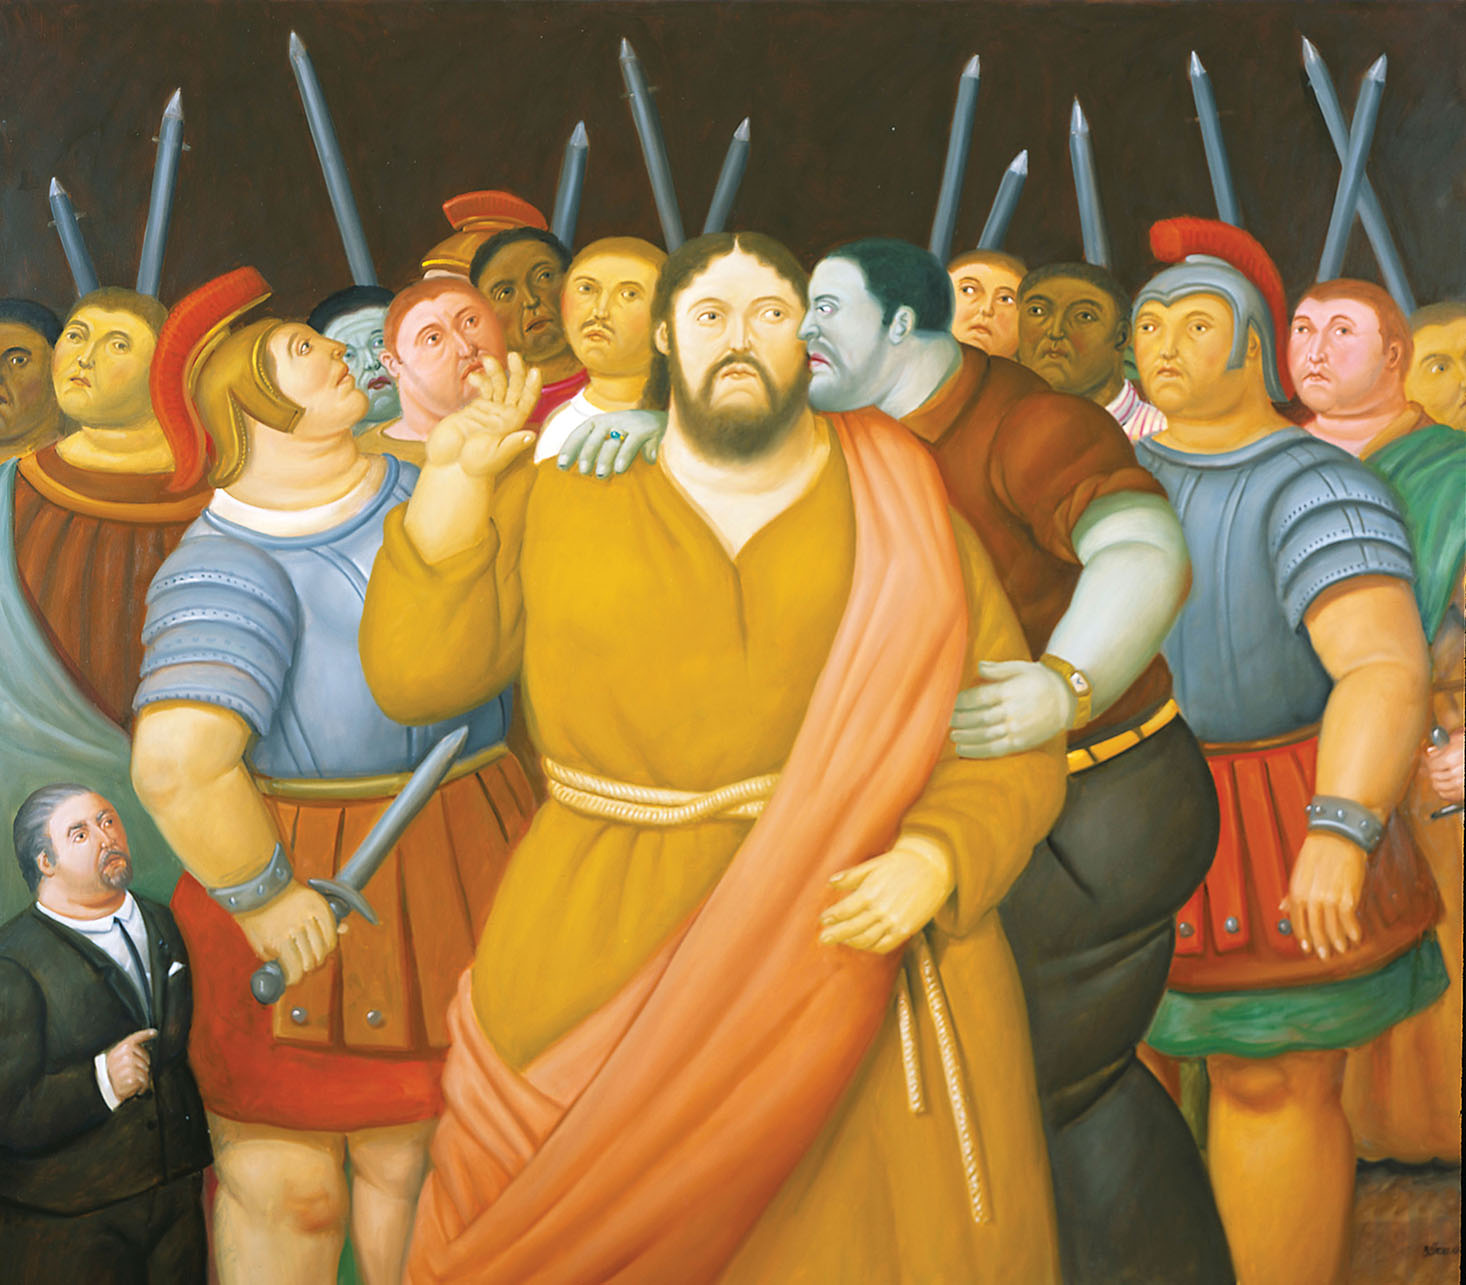 Fernando Botero “The Kiss of Judas” (El beso de Judas)  2011, oil on canvas, 55” x 63” From his series “Via Crucis:  The Passion of the Christ.” (Painting by and © Fernando Botero, image courtesy of The Marlborough Gallery, New York.)